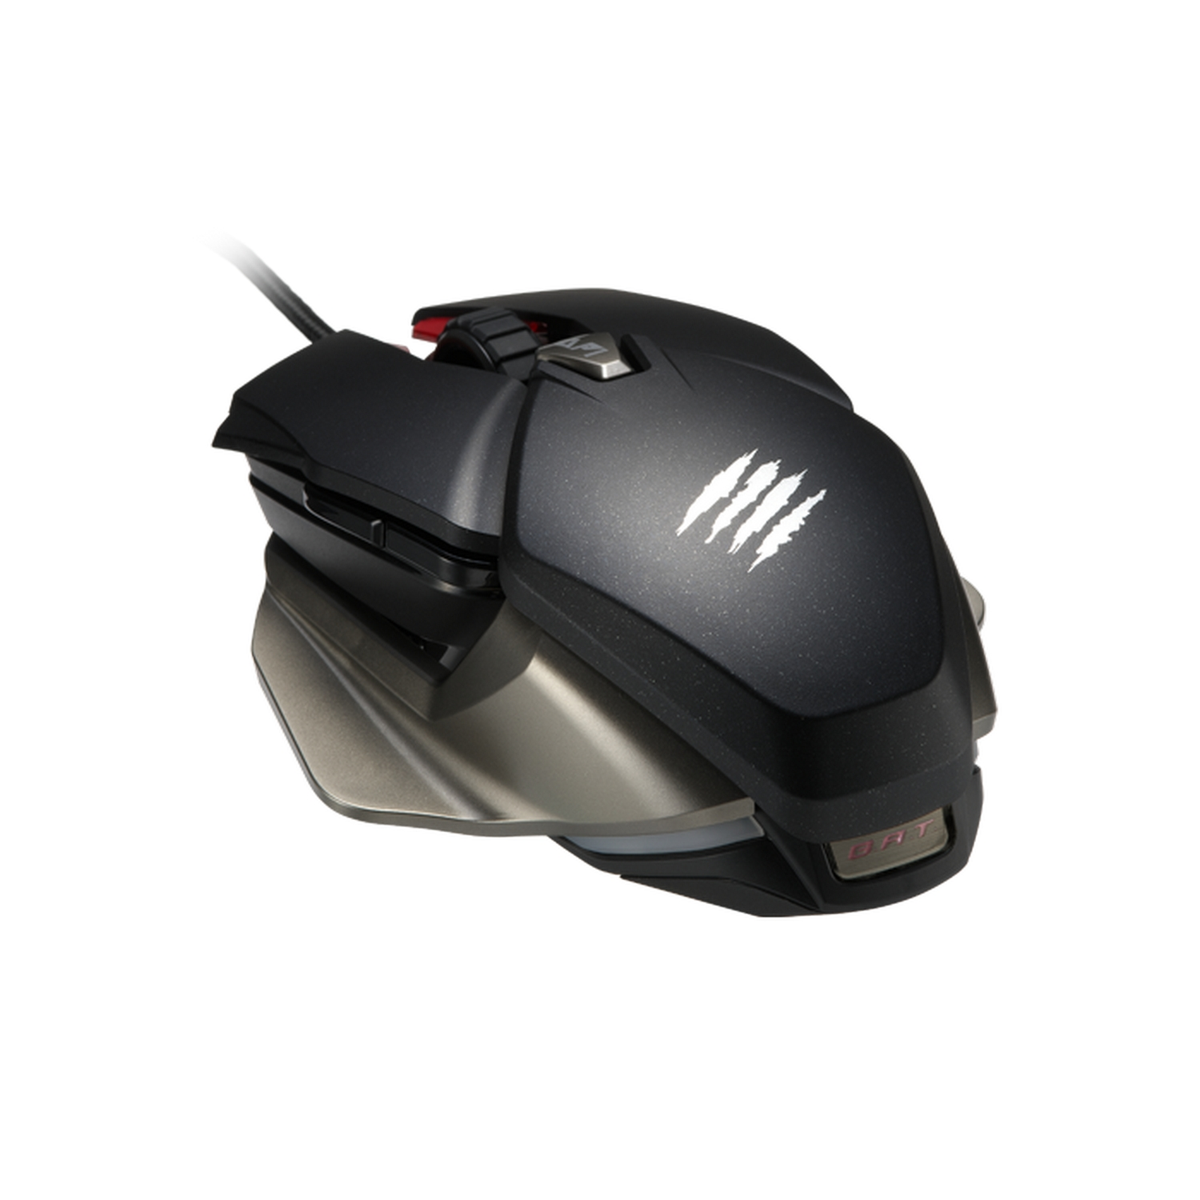 Gaming Mouse, Performance Ambidextreous Mouse, 6+ Schwarz Black Gaming CATZ B.A.T. MAD